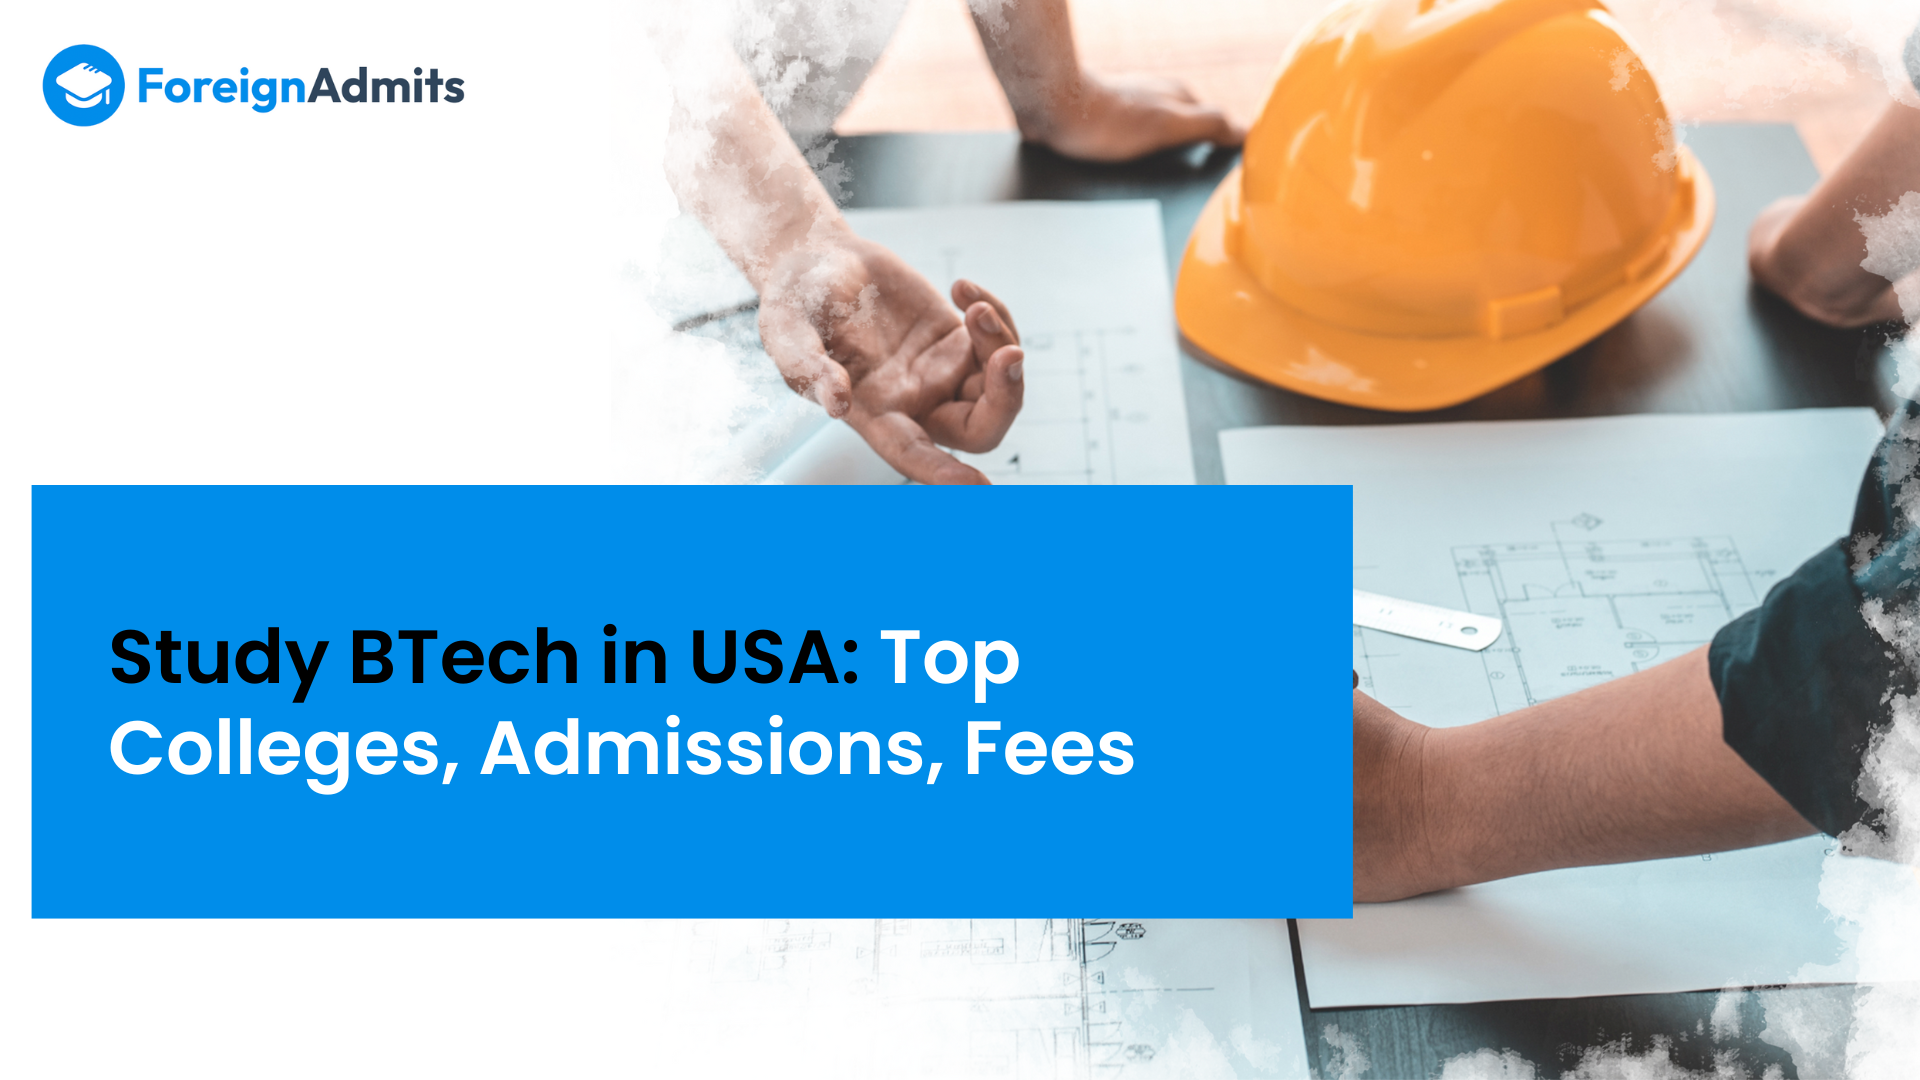 Study BTech in USA: Top Colleges, Admissions, Fees